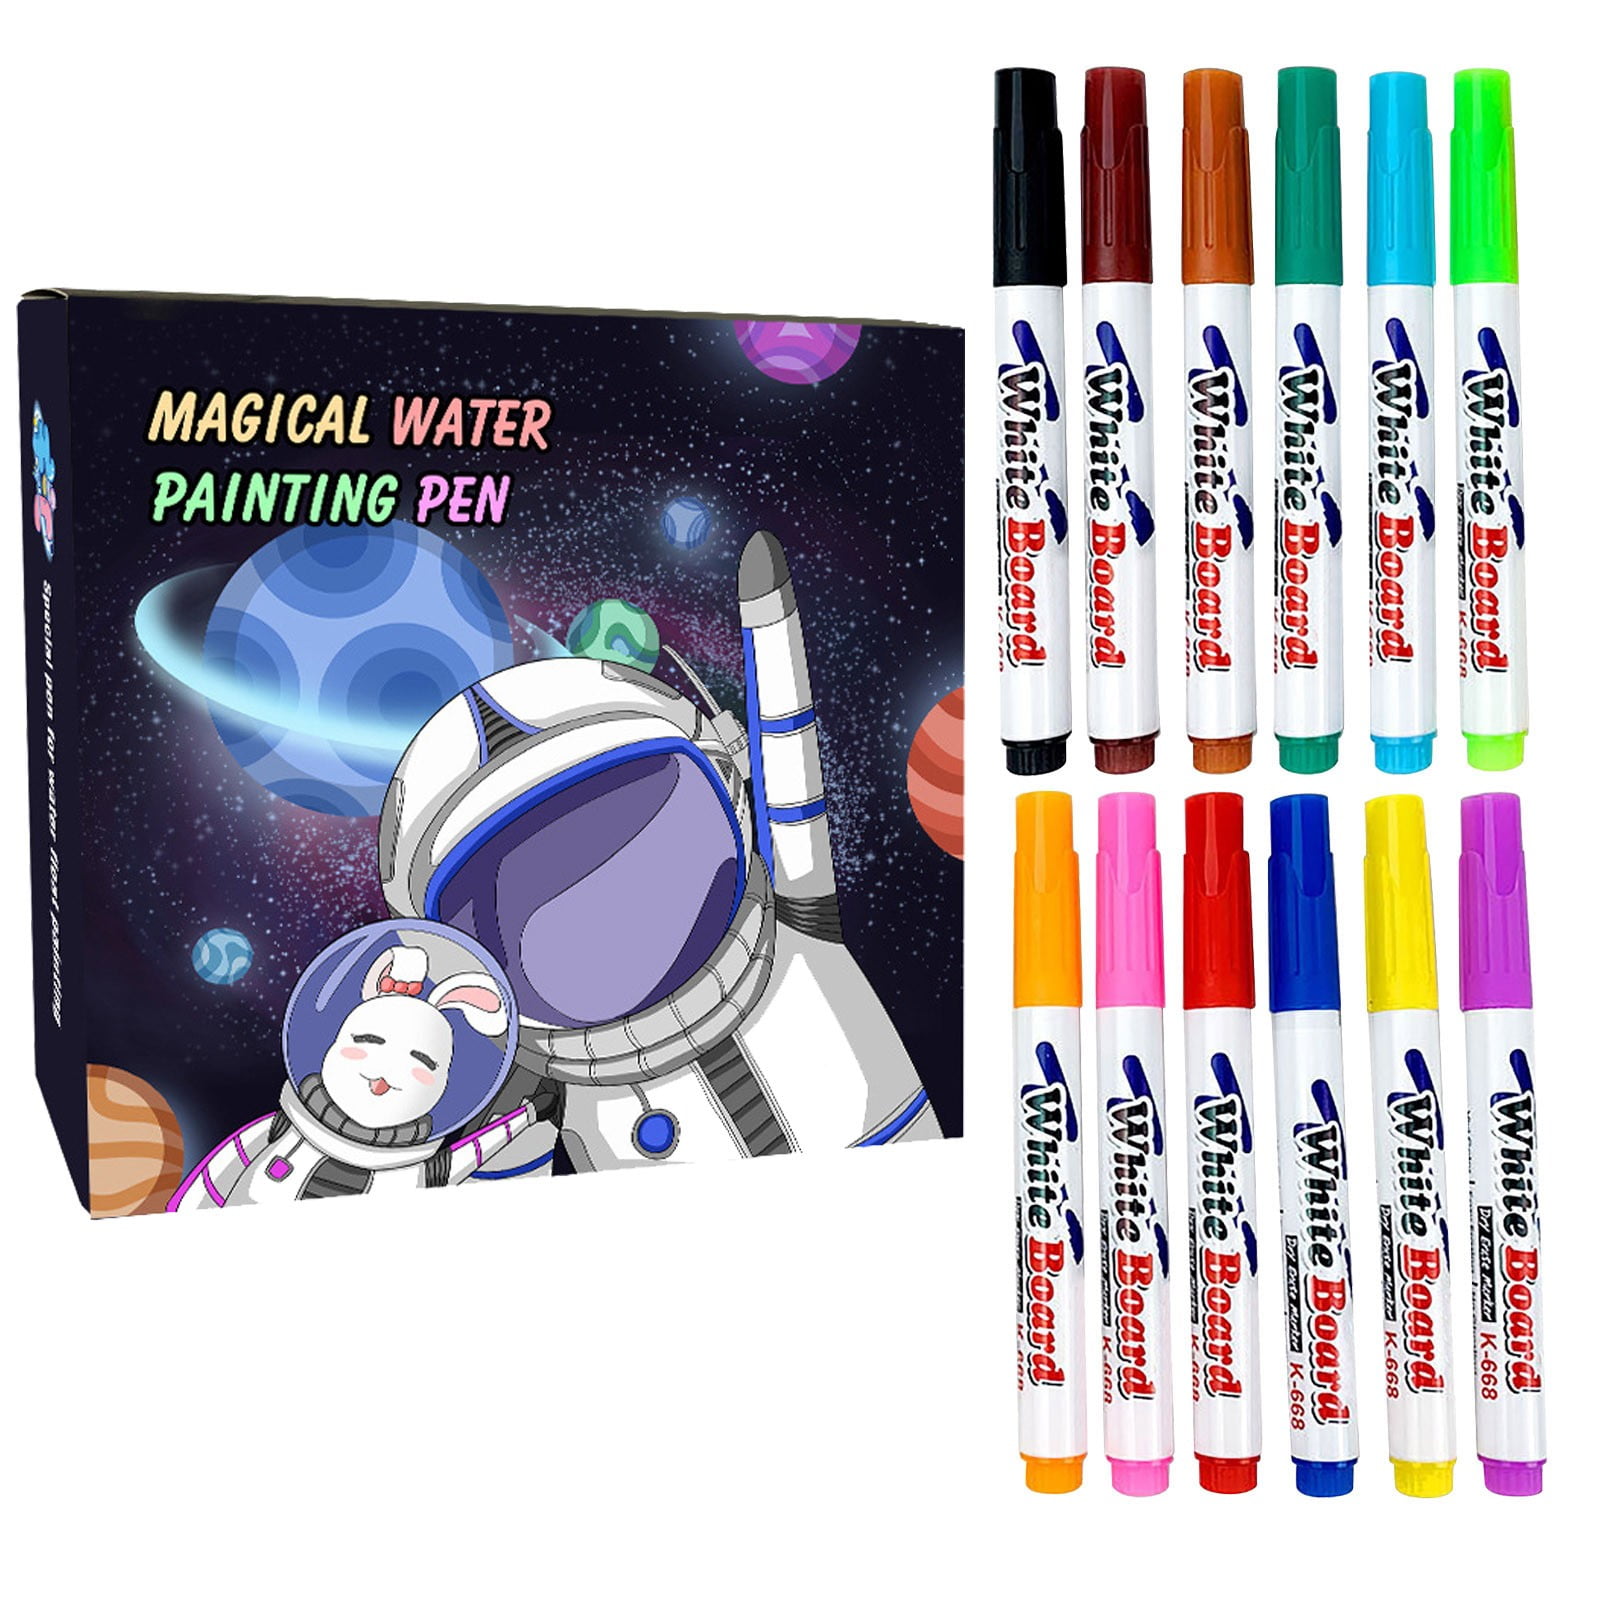  ibasenice 1 Set Floating Pen Floating Ink Pens Water Drawing  Toys Water Vapor Pen Painting Invisible Ink Pen Water Pen Watercolor Pen  Colored Plastic Child Erasable Paint Pen : Office Products